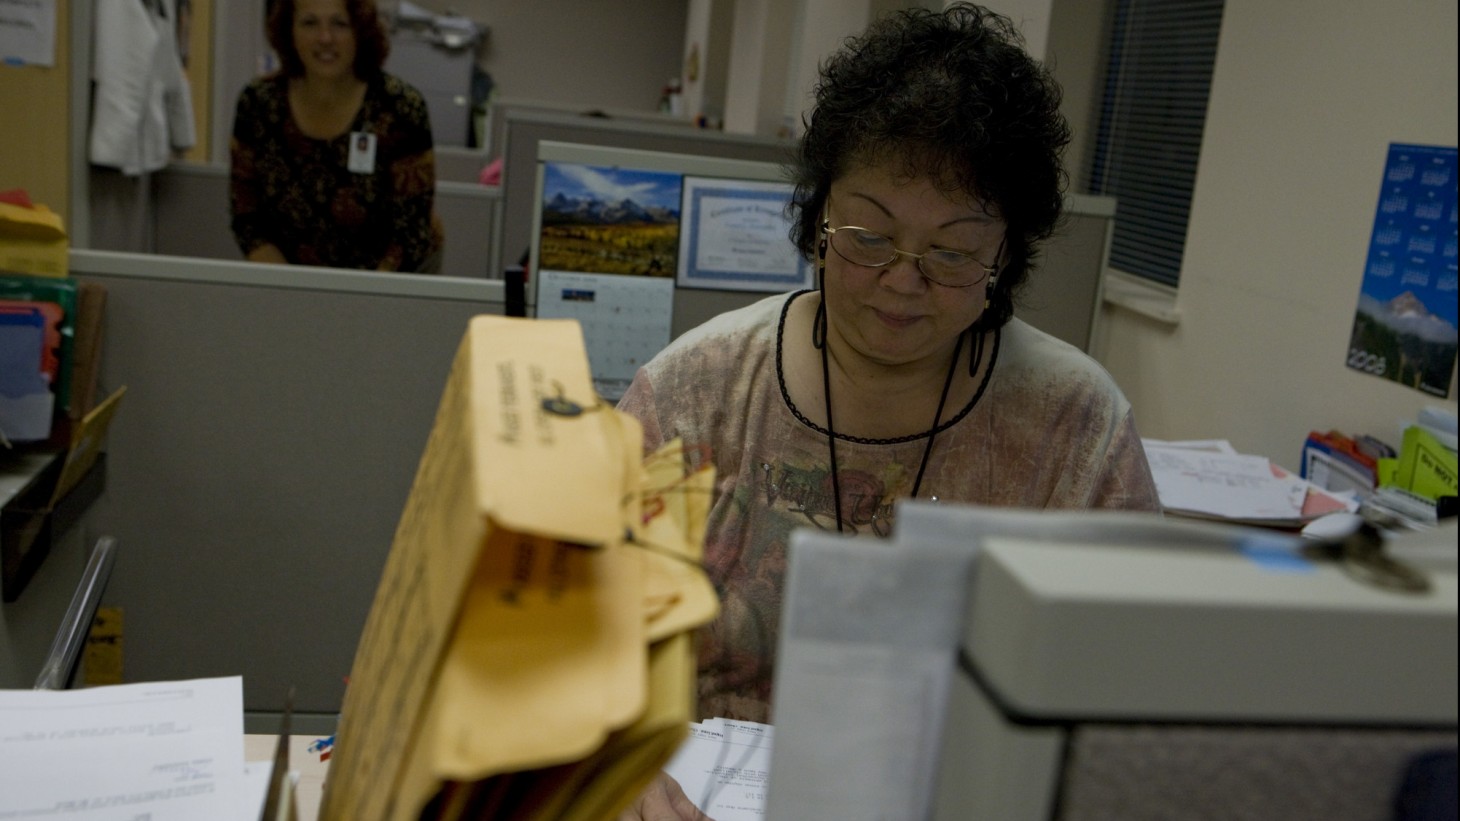 Woman working with documents.